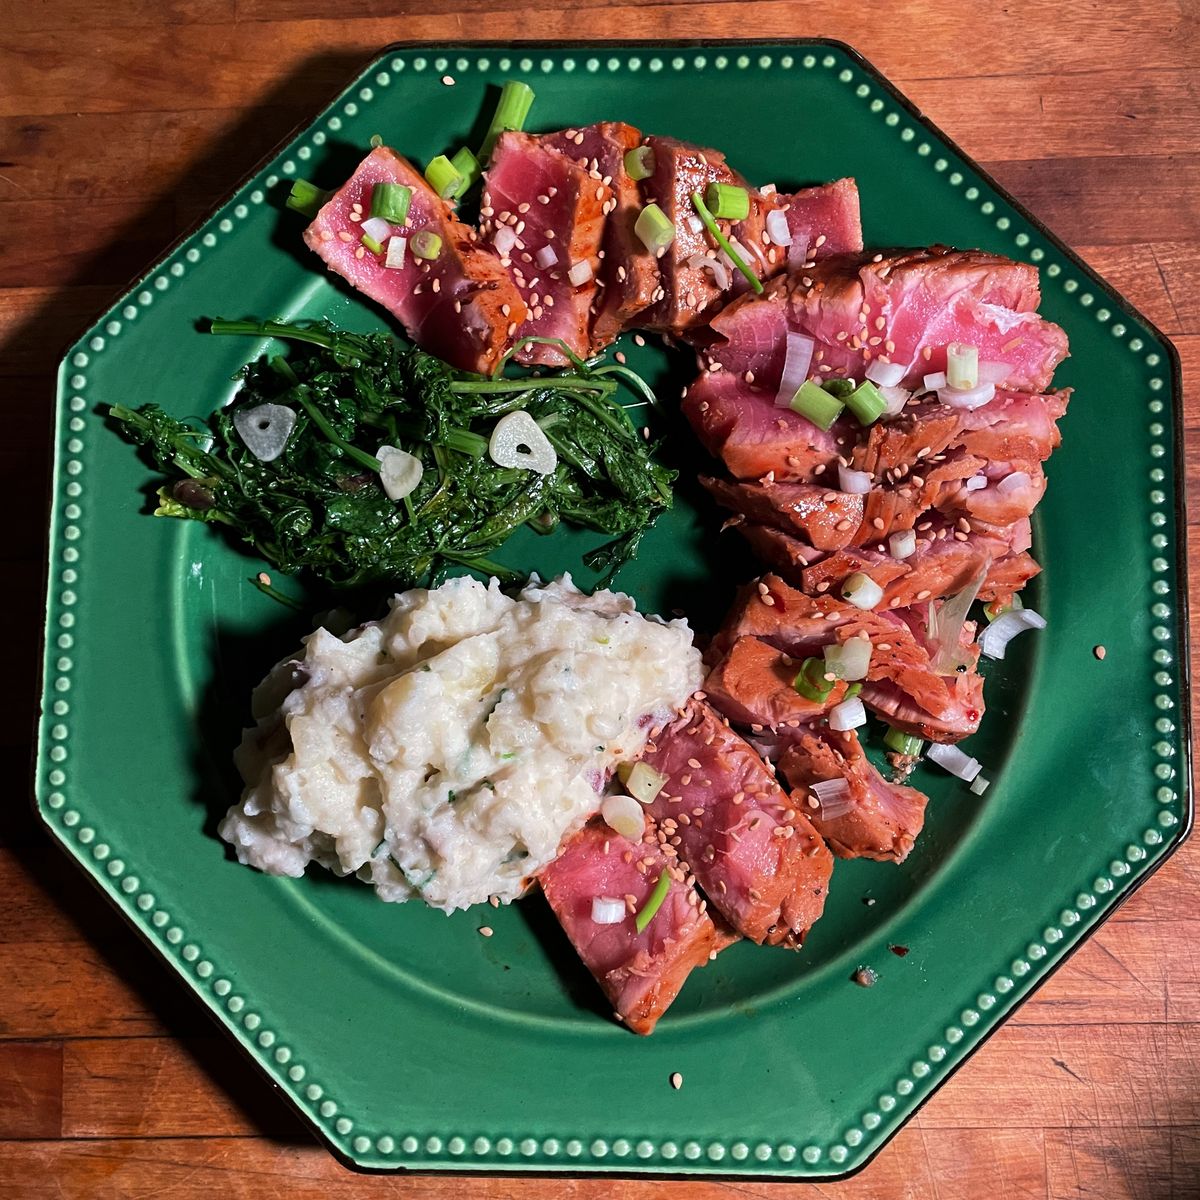 Ahi Tuna With Braised Baby Mustard Greens and Garlic Smashed Potatoes with Chives